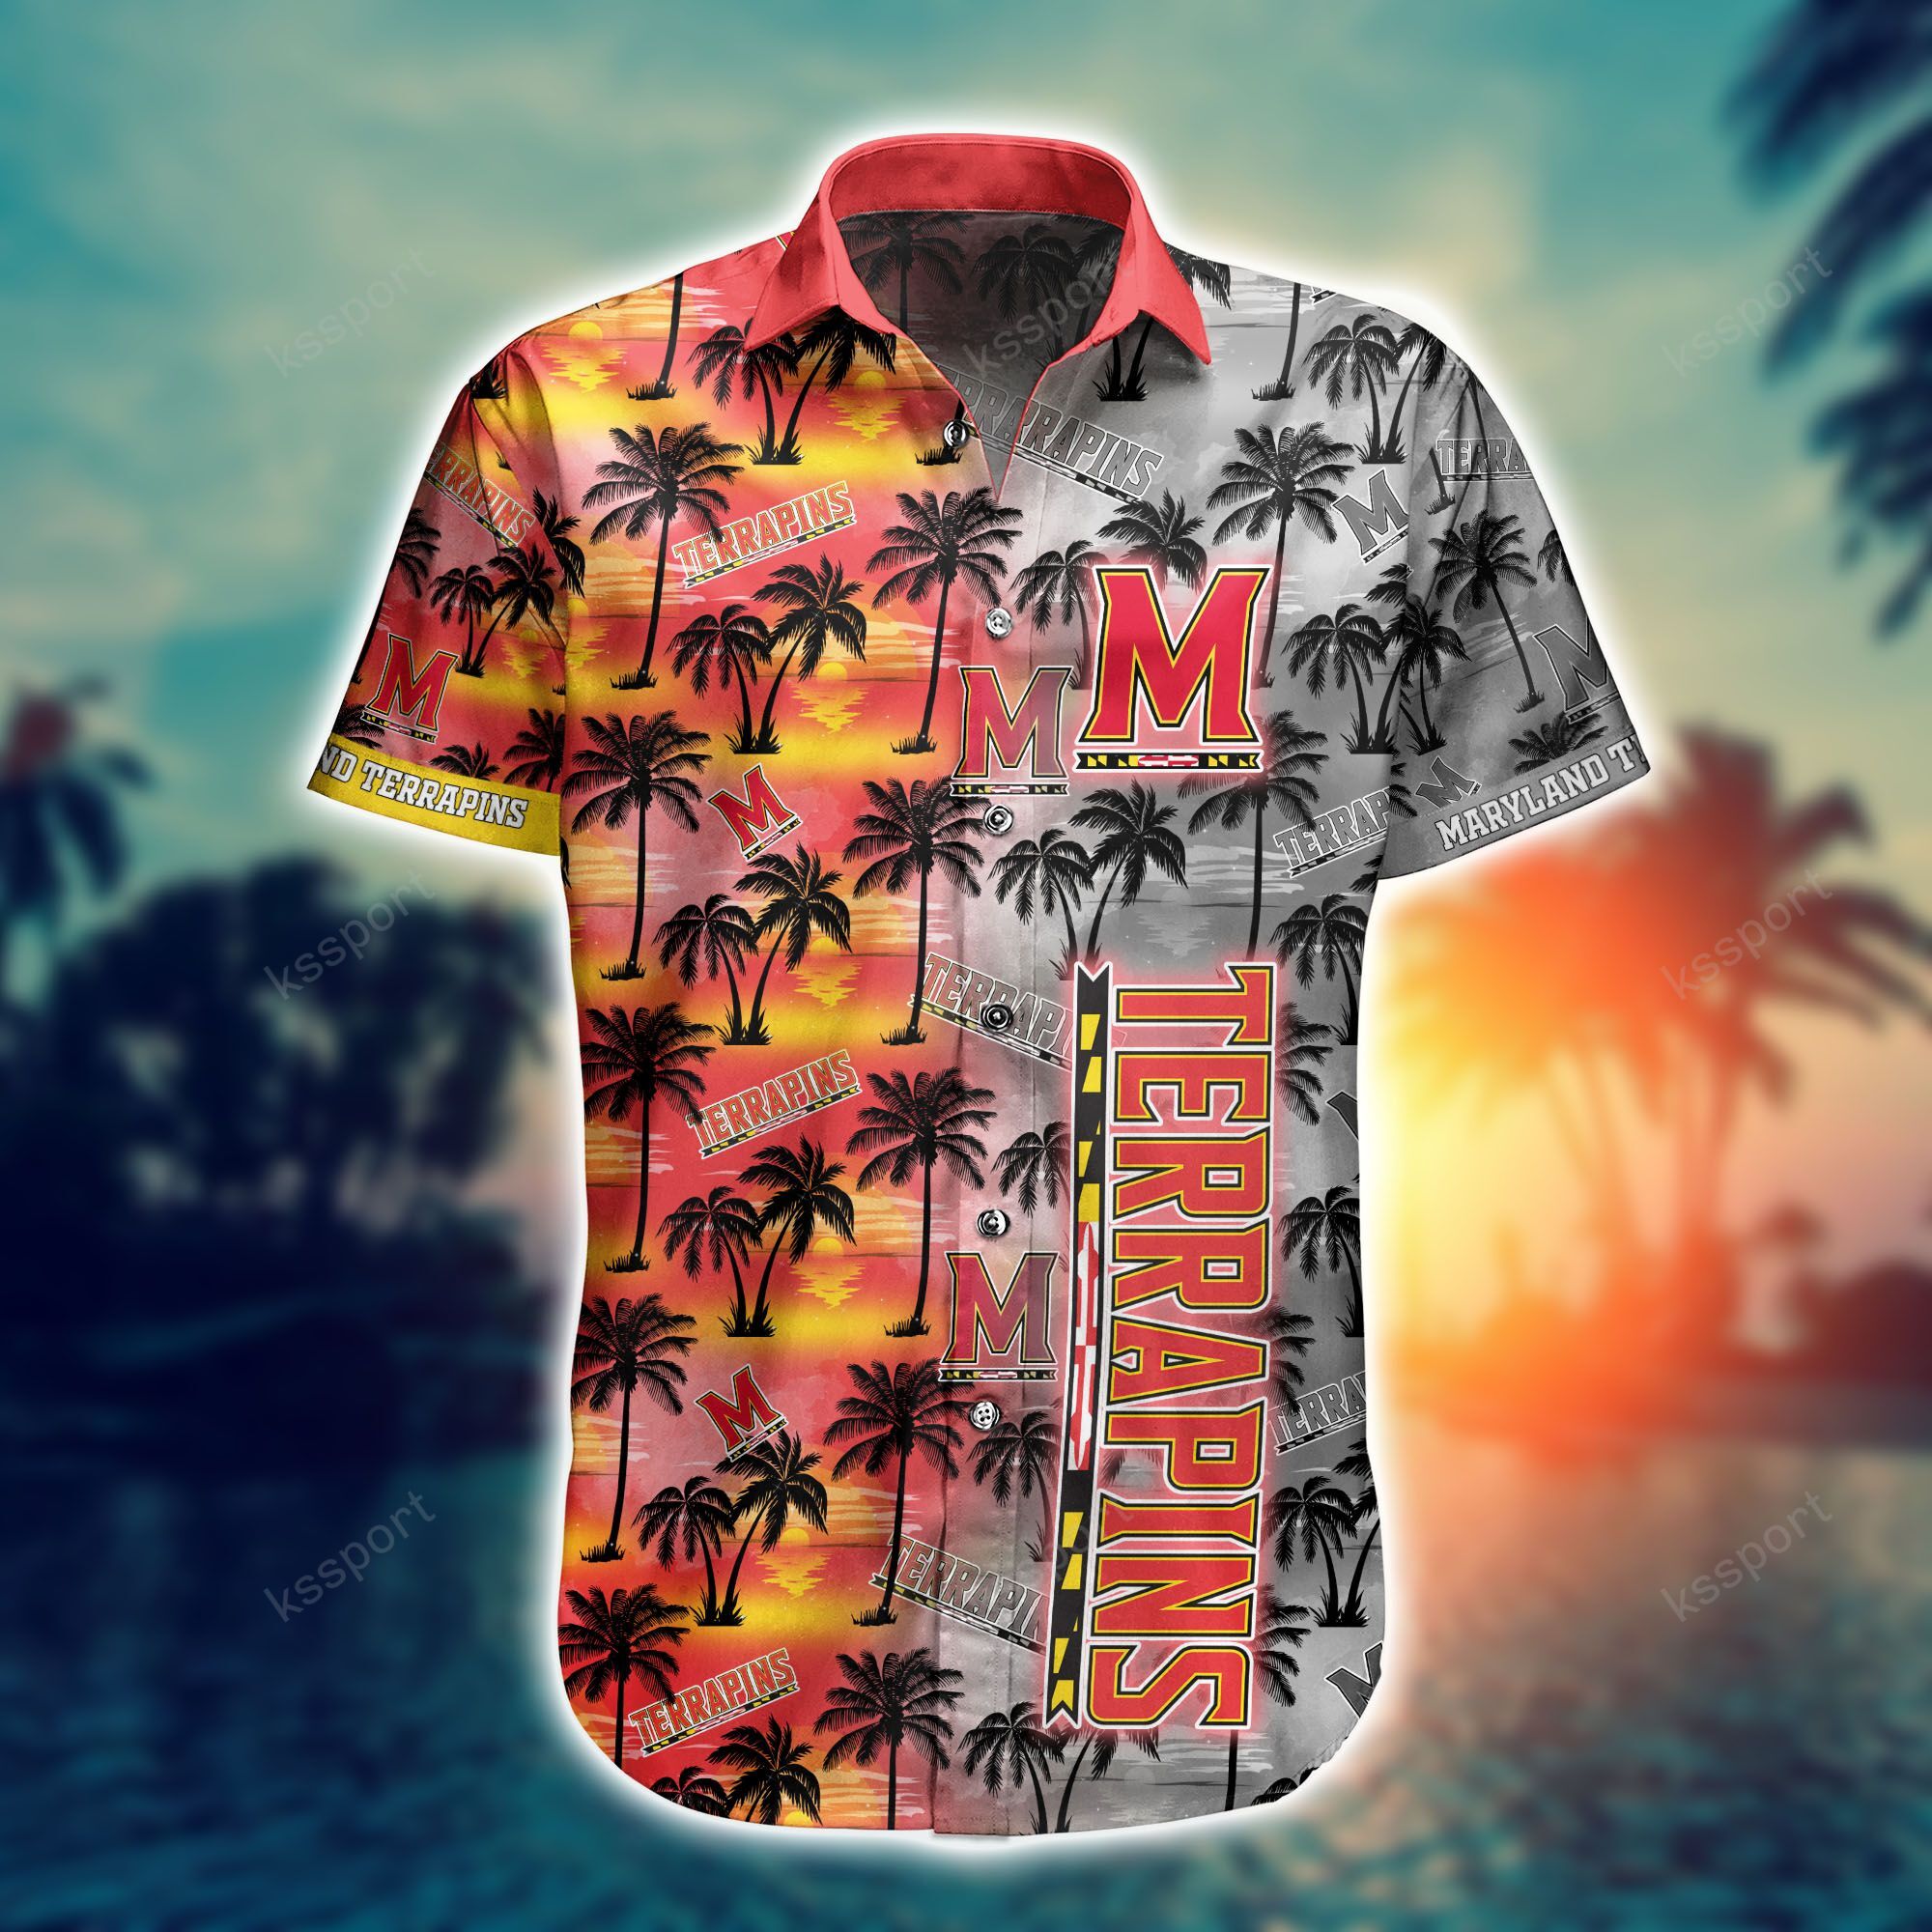 Top cool Hawaiian shirt 2022 - Make sure you get yours today before they run out! 146